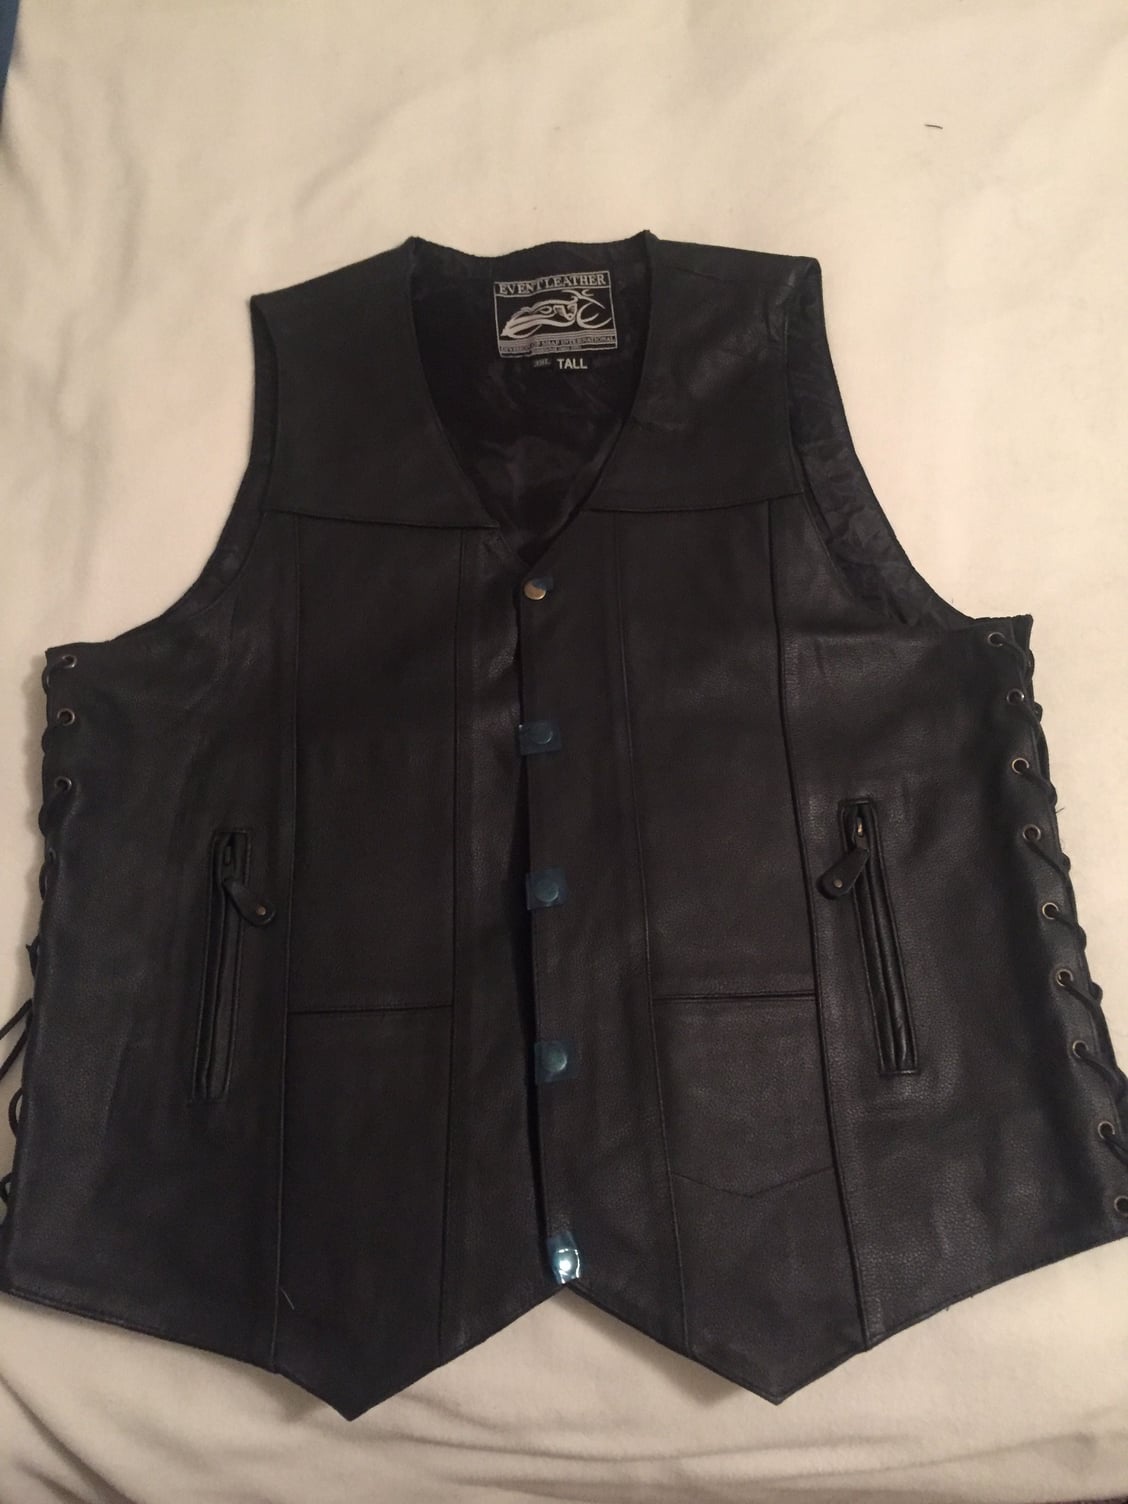 3XL Tall brand new leather vest - Harley Davidson Forums